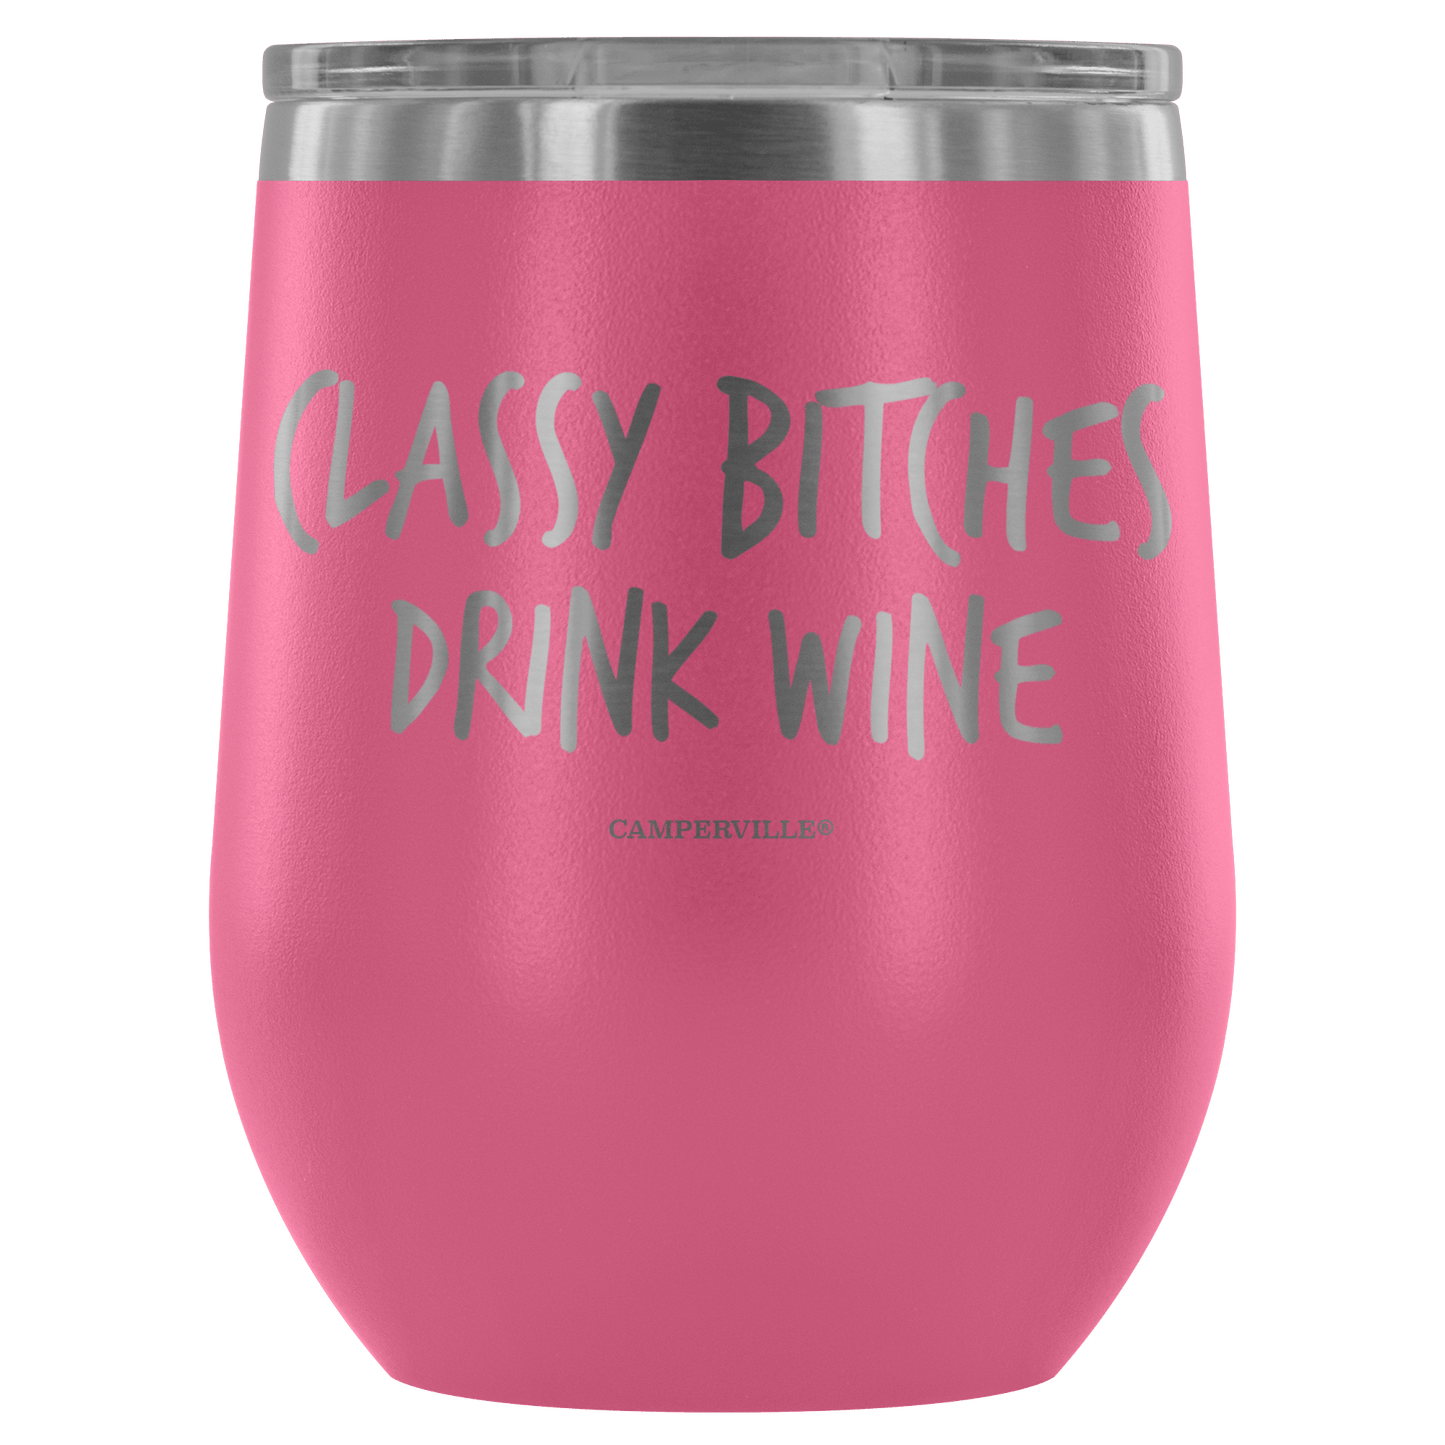 "Classy Bitches Drink Wine" - Stemless Wine Cup